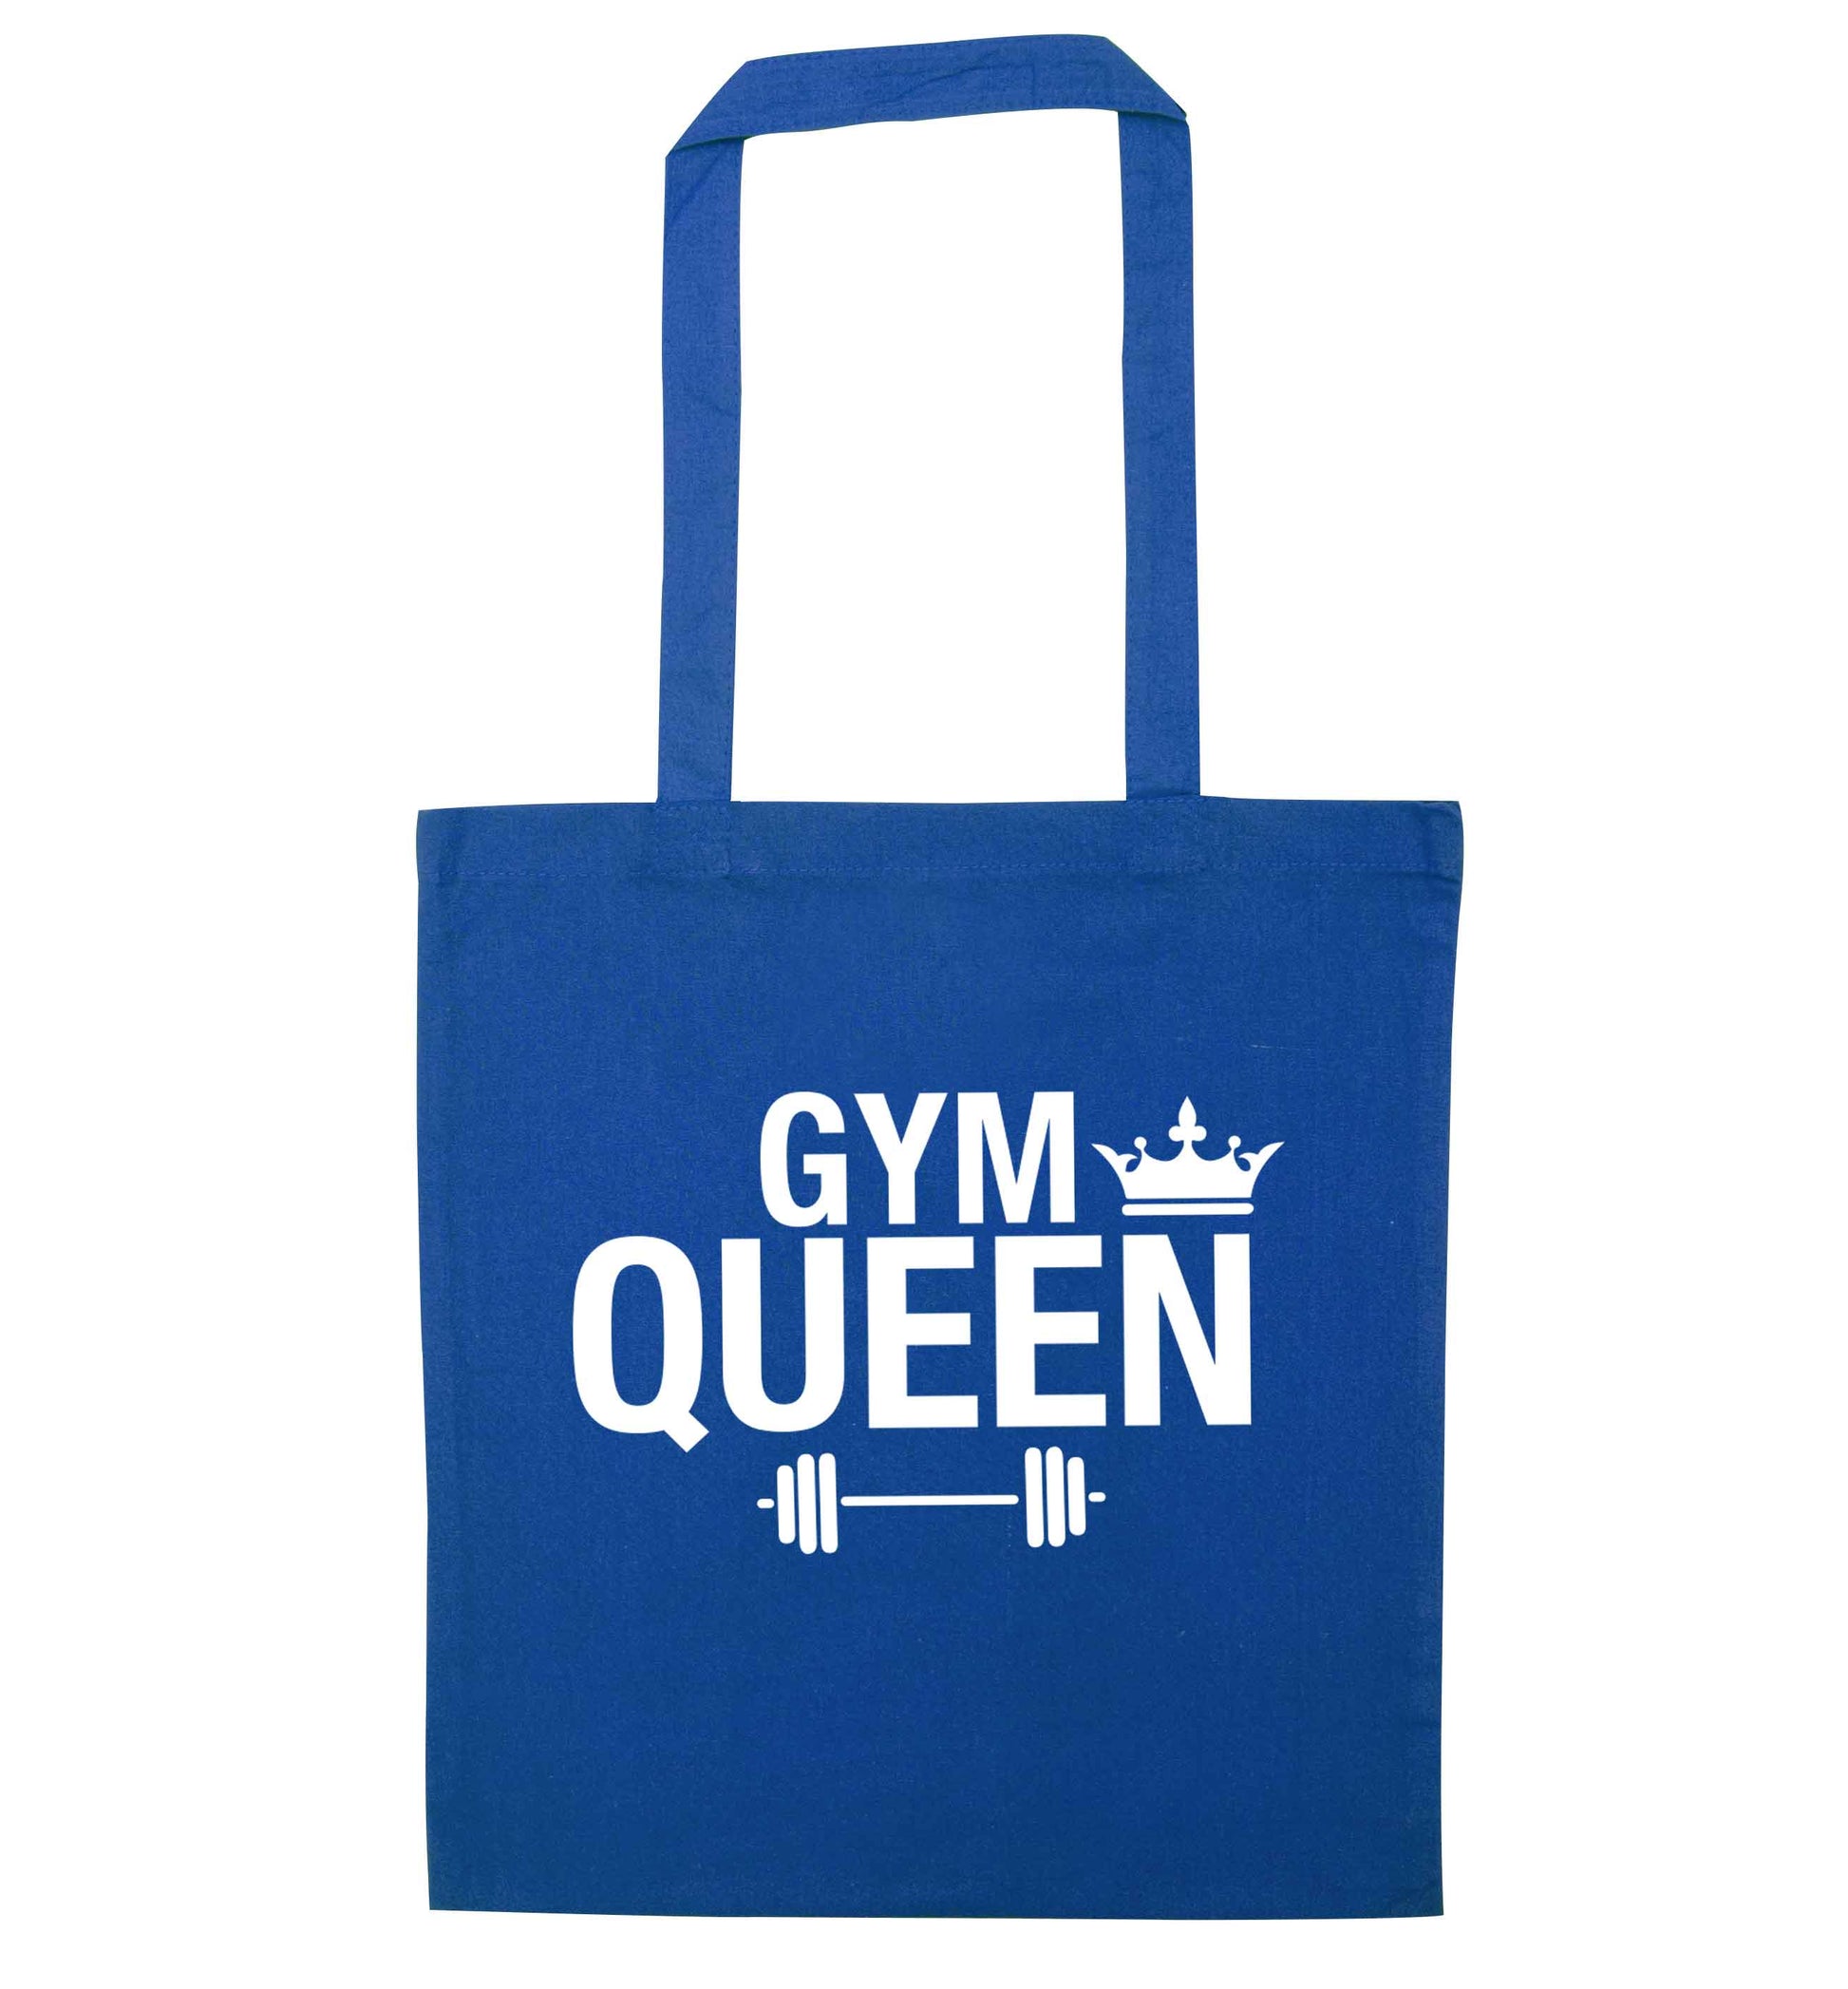 Gym queen blue tote bag